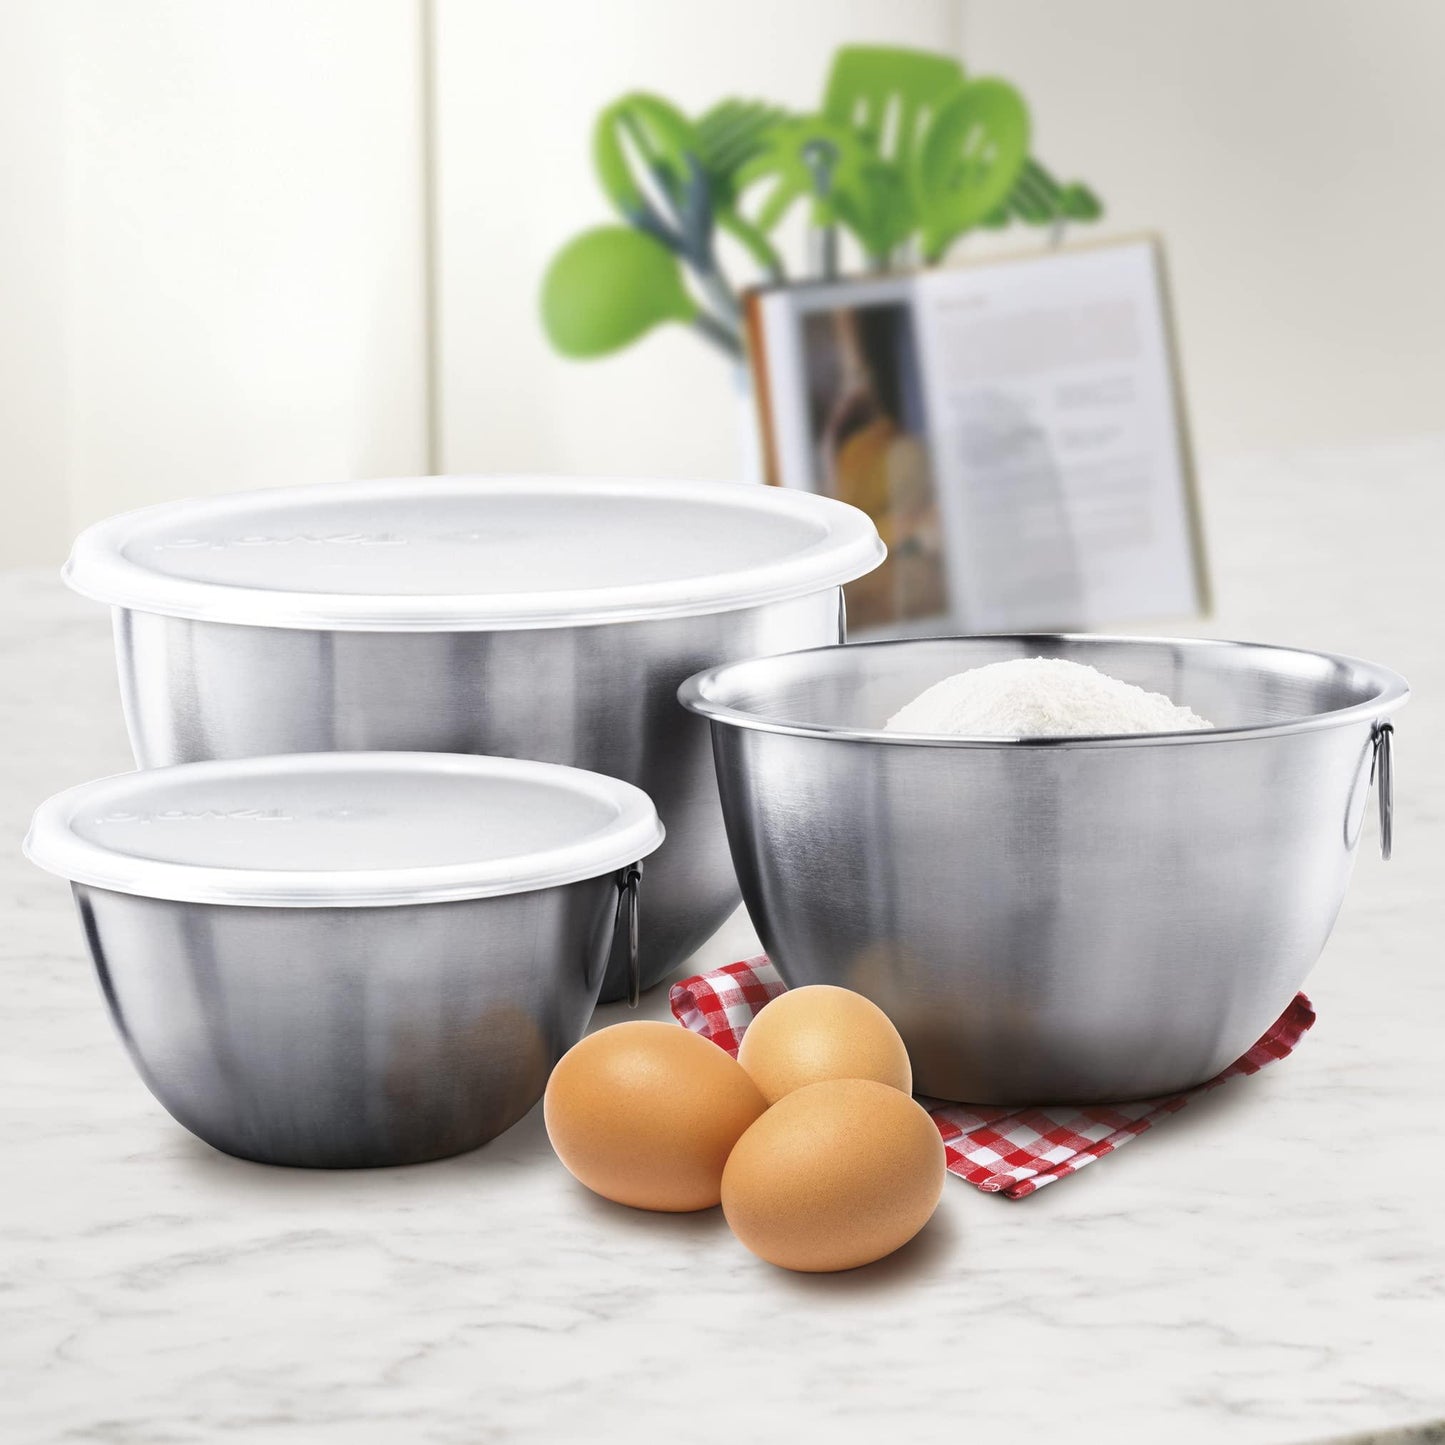 Tovolo Stainless Steel, Set of 3 Mixing Tight-Seal Dishwasher-Safe Metal Bowls with BPA-Free Lids for Food Storage, Stainless Steel - CookCave